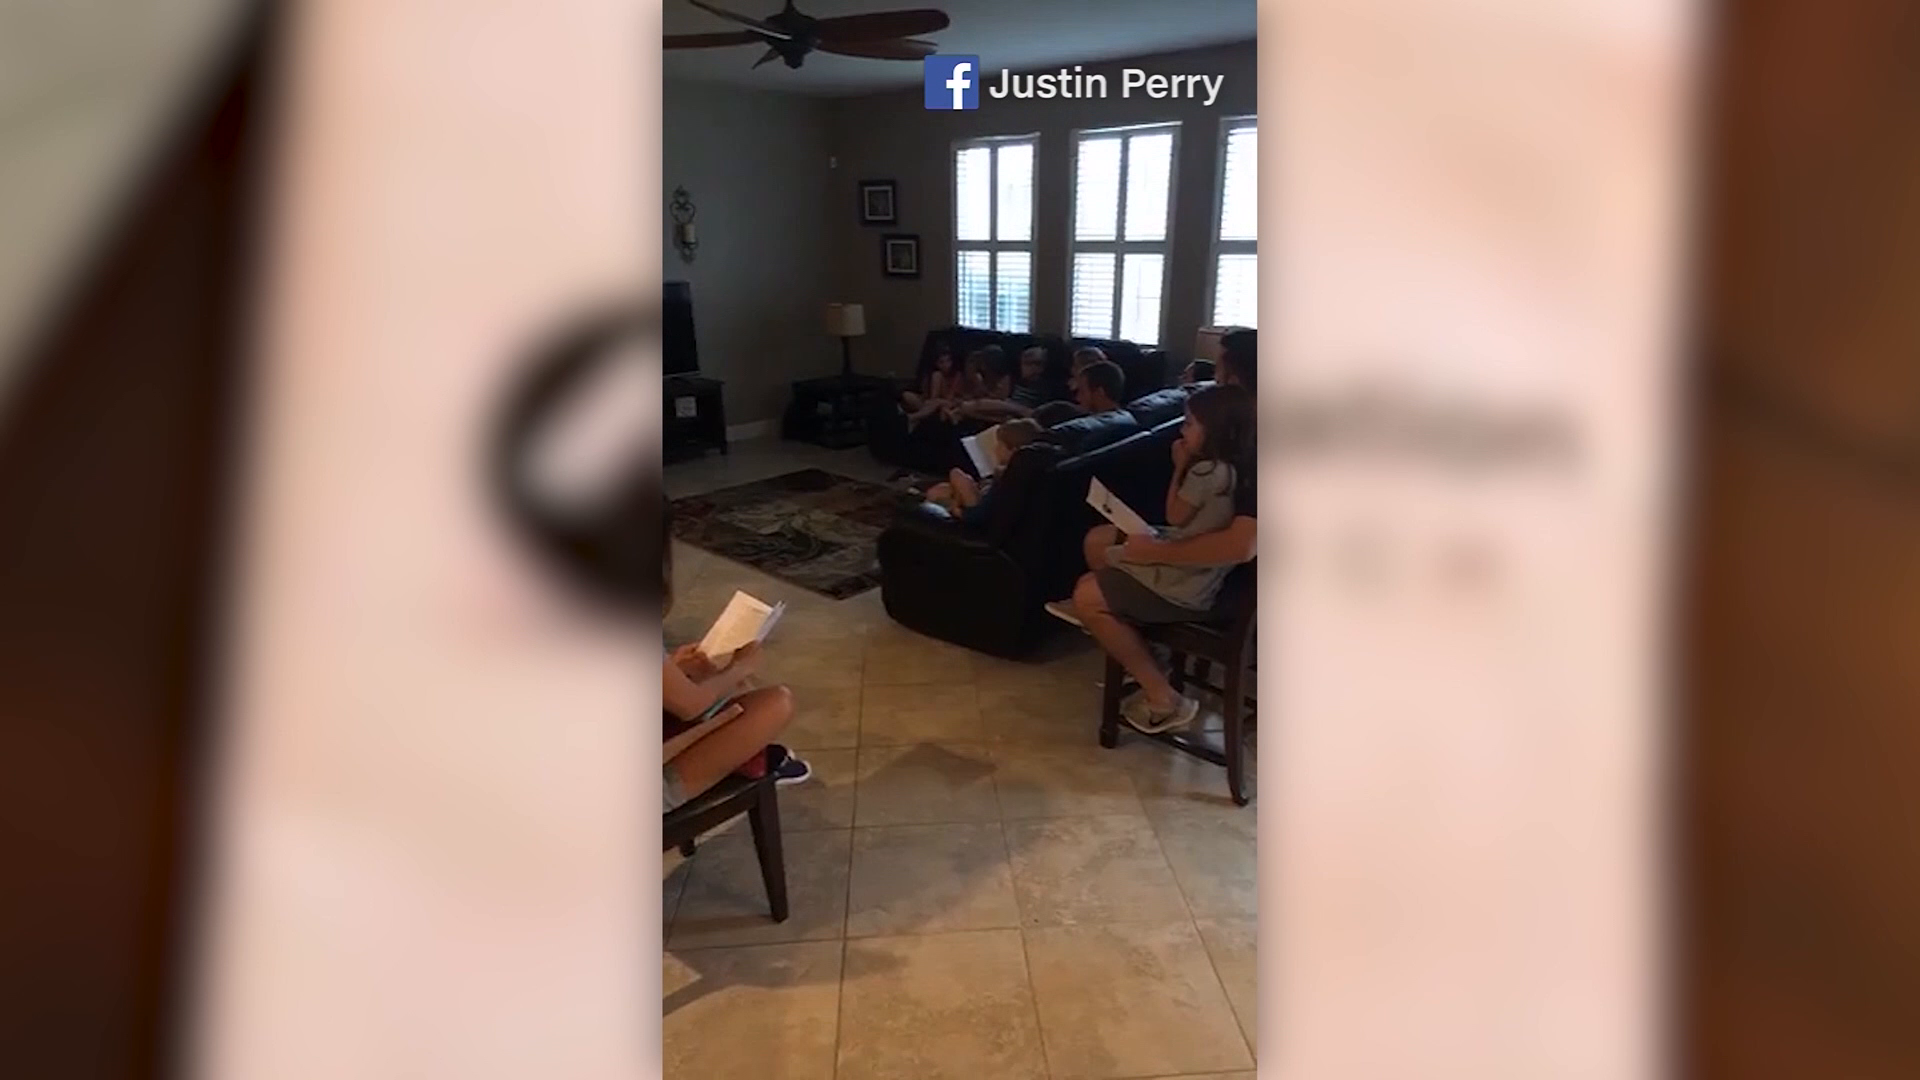 Church group meets to sing and pray during Irma